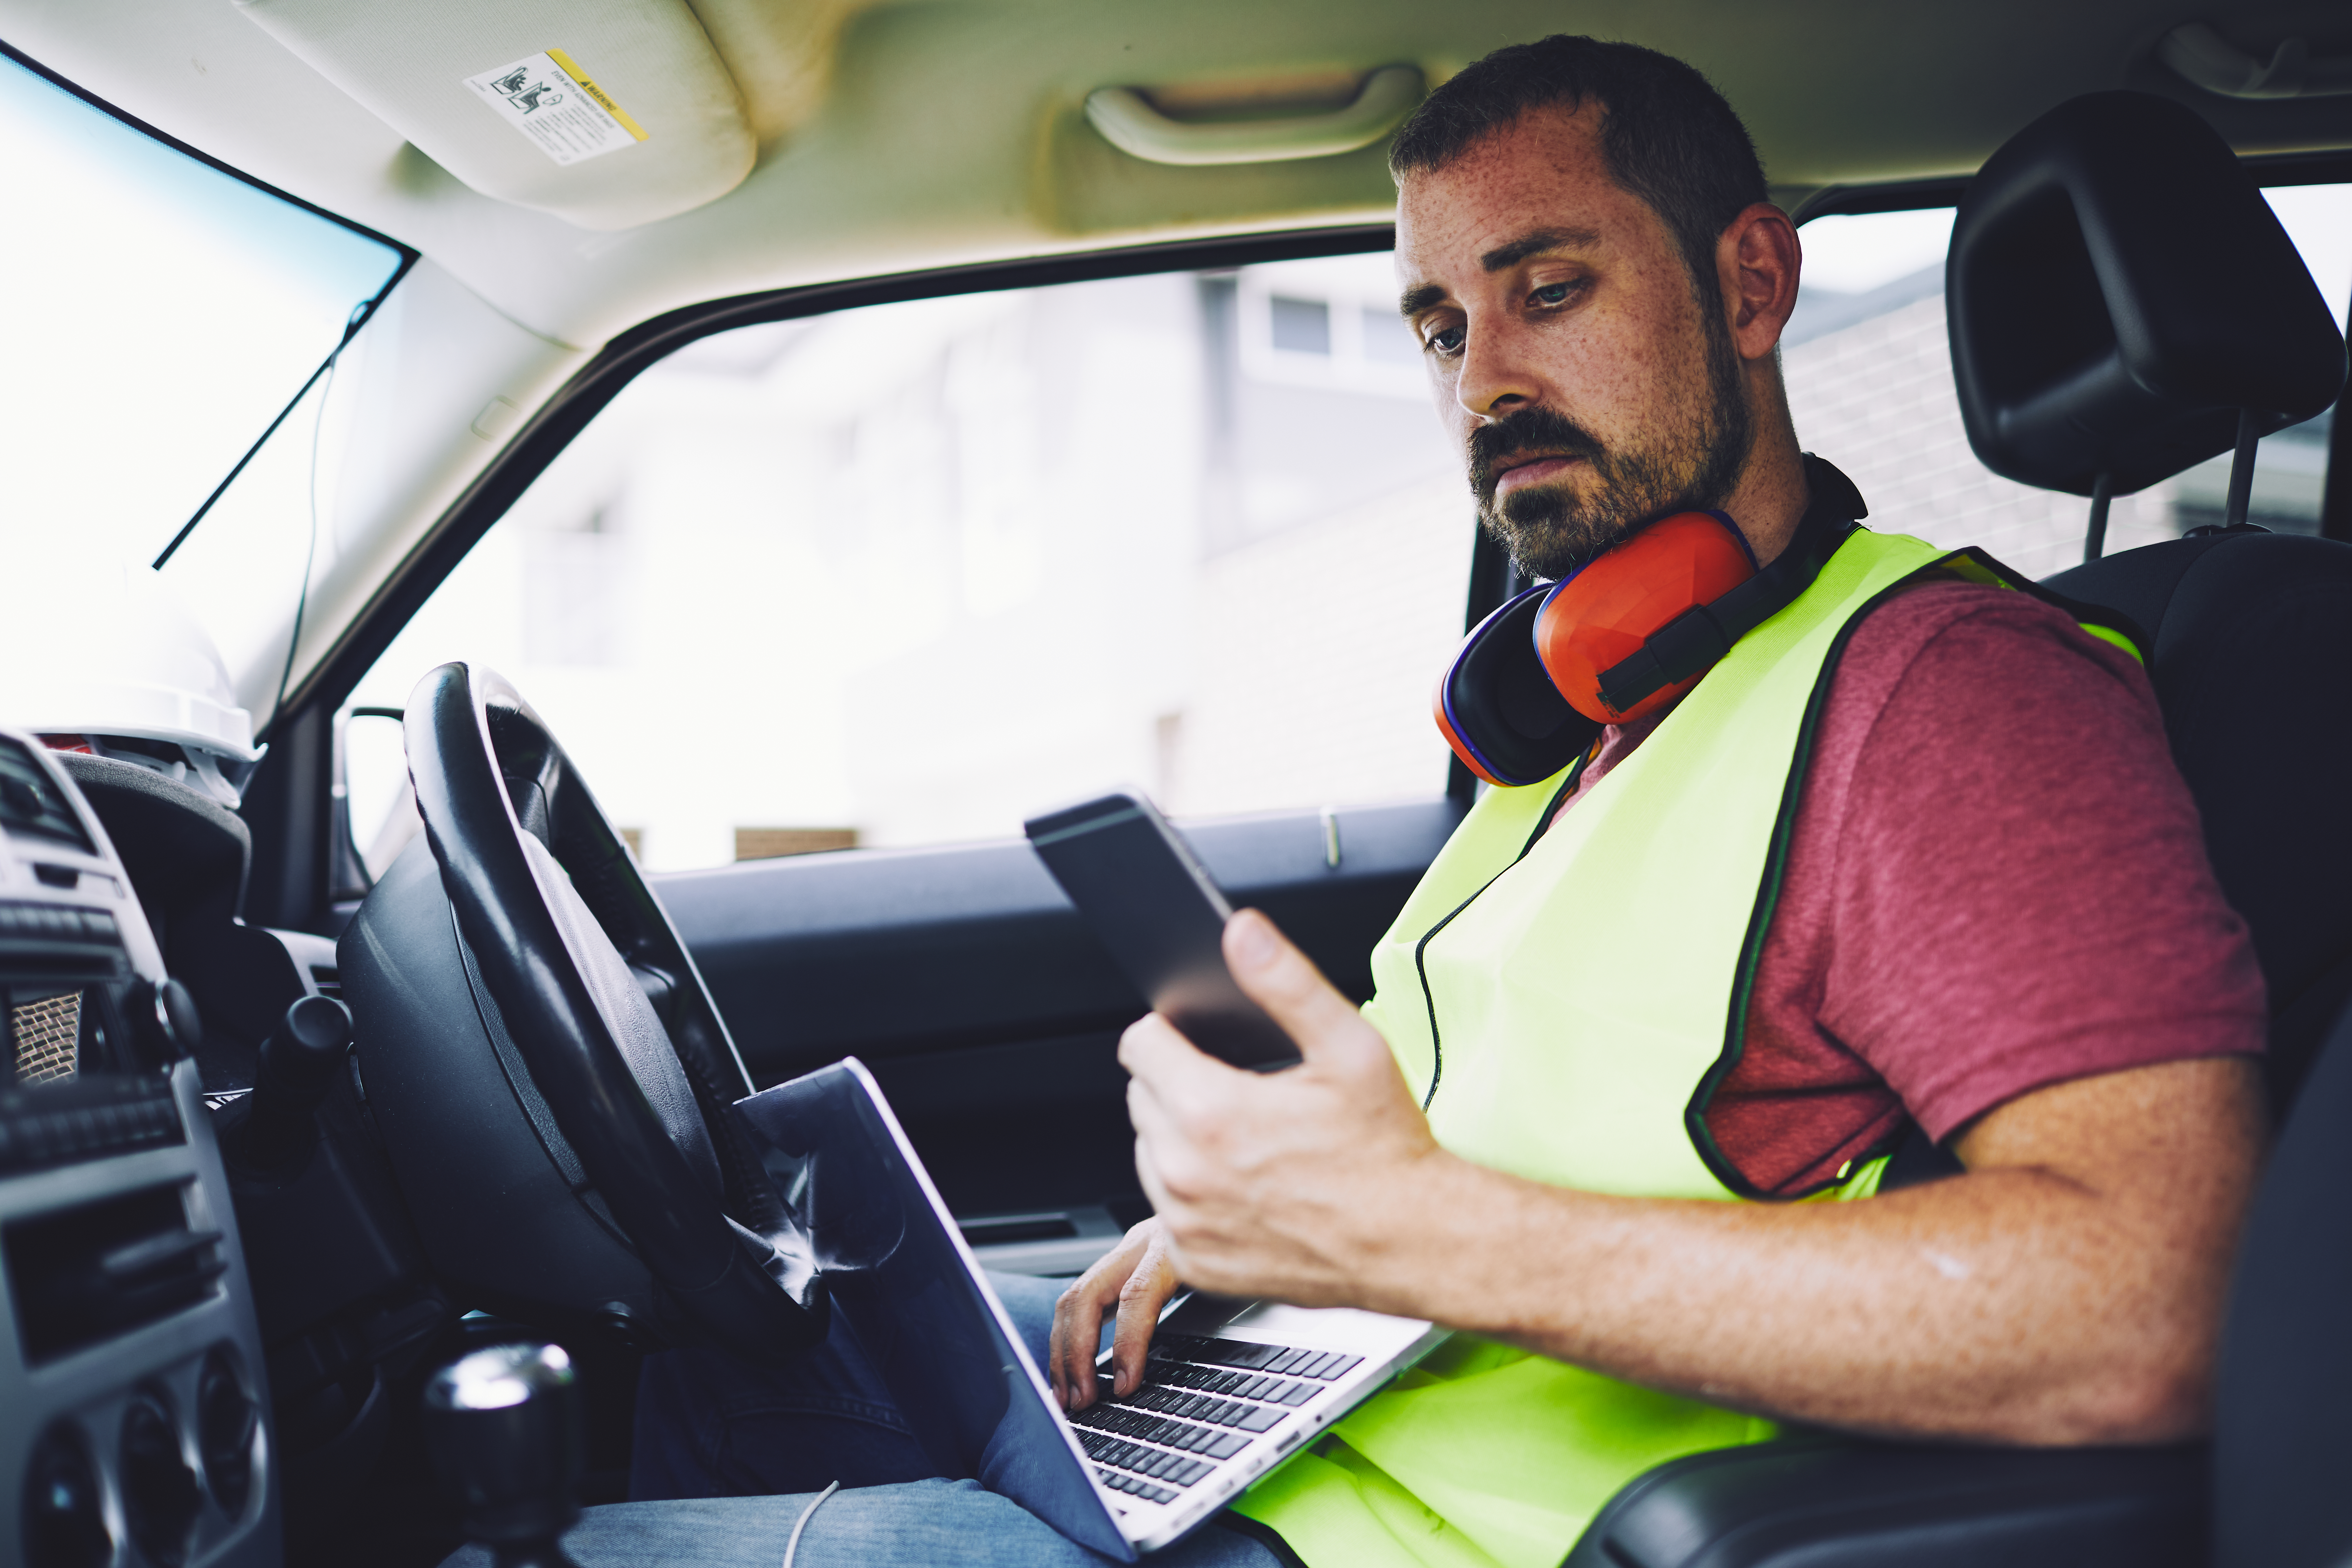 photo of contractor in vehicle looking at smartphone with laptop in his lap